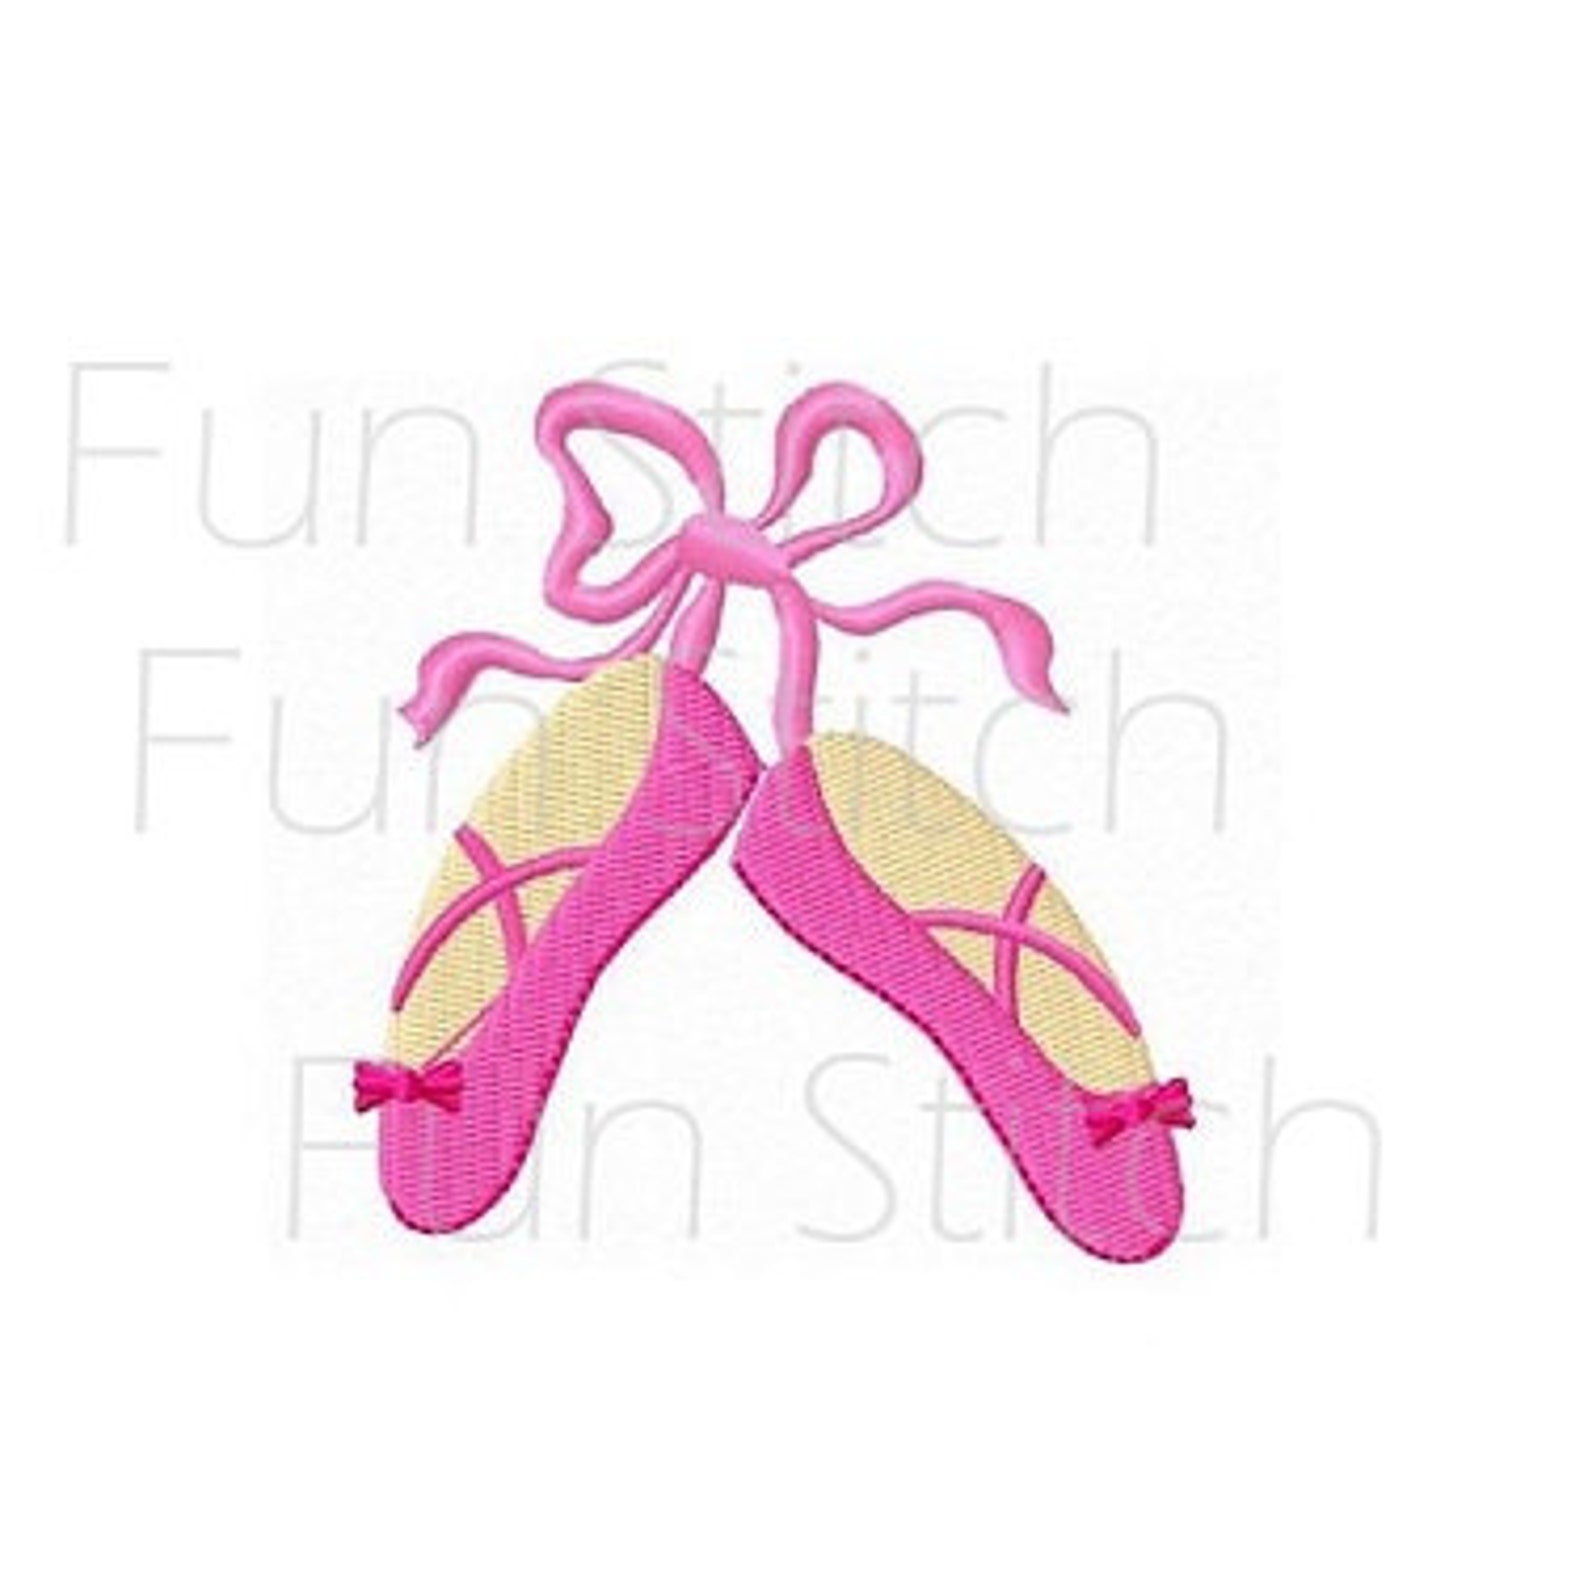 ballet shoes slippers love to dance ballerina machine embroidery design digital pattern instant download